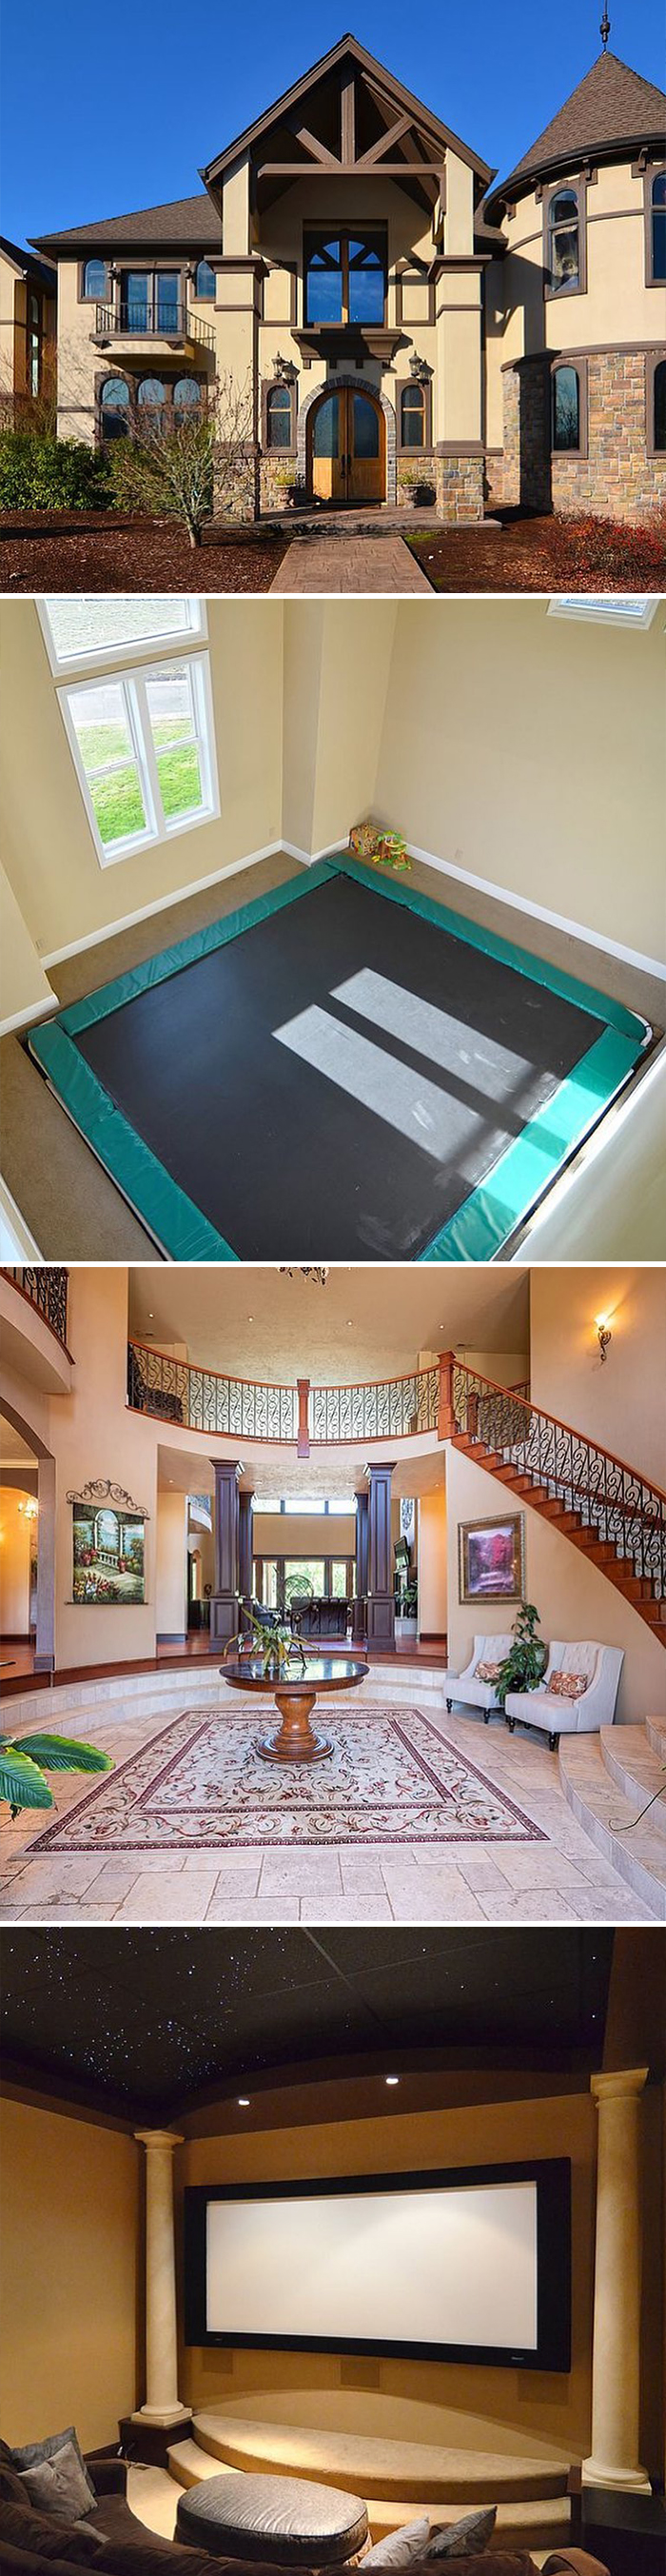 This Home Has A Built In Trampoline. $1,699,000